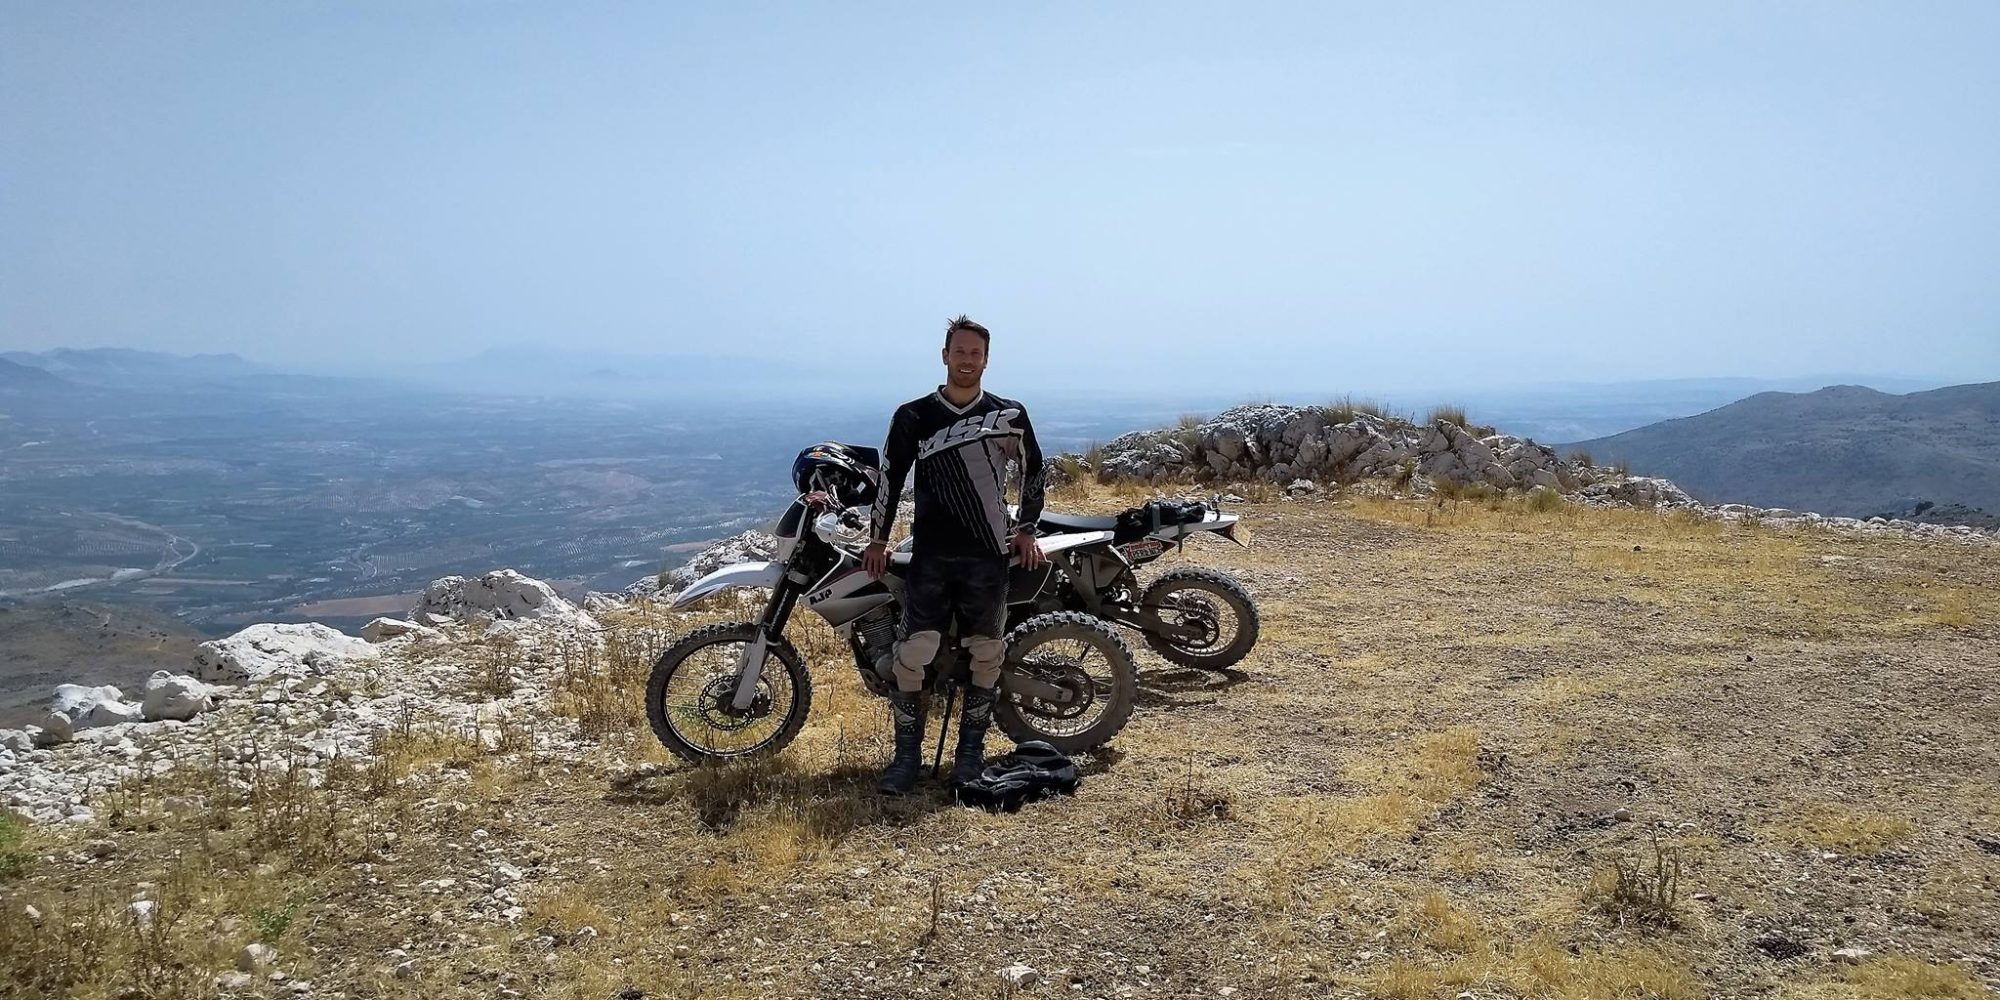 Fantastic three days of riding off-road in Spain